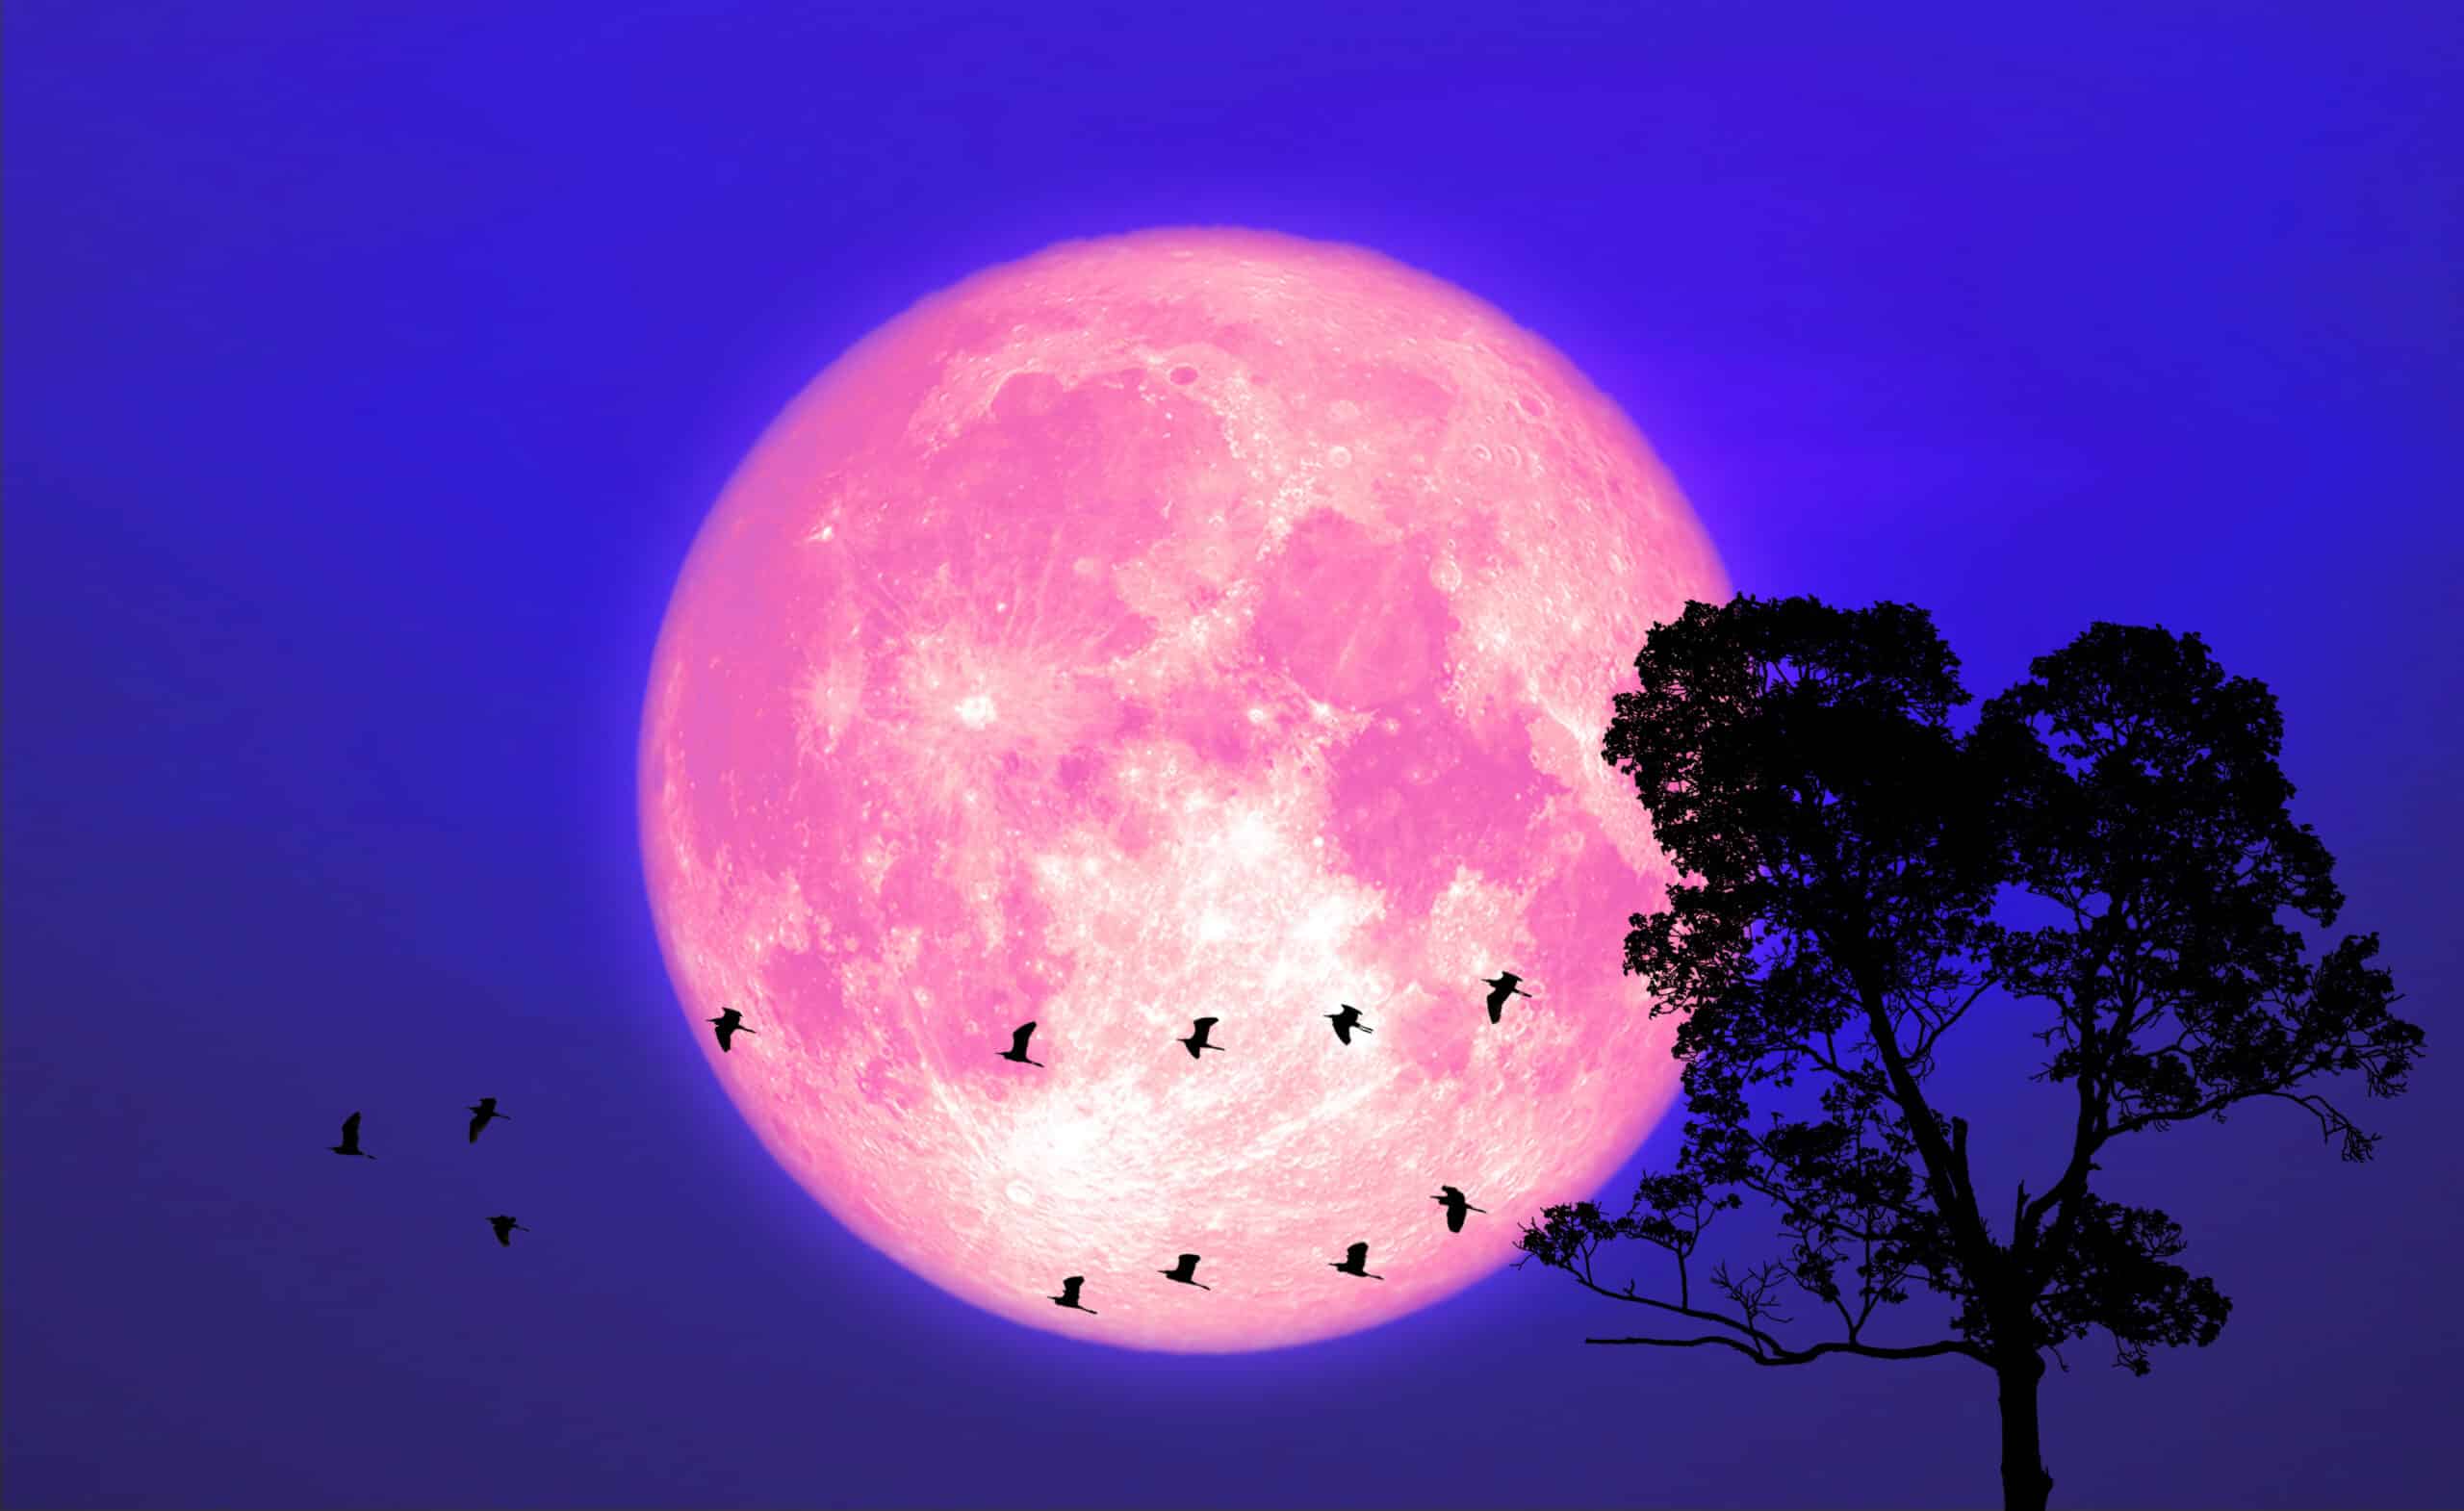 The Full Flower Moon Is Rising Thursday With Red Supergiant Star